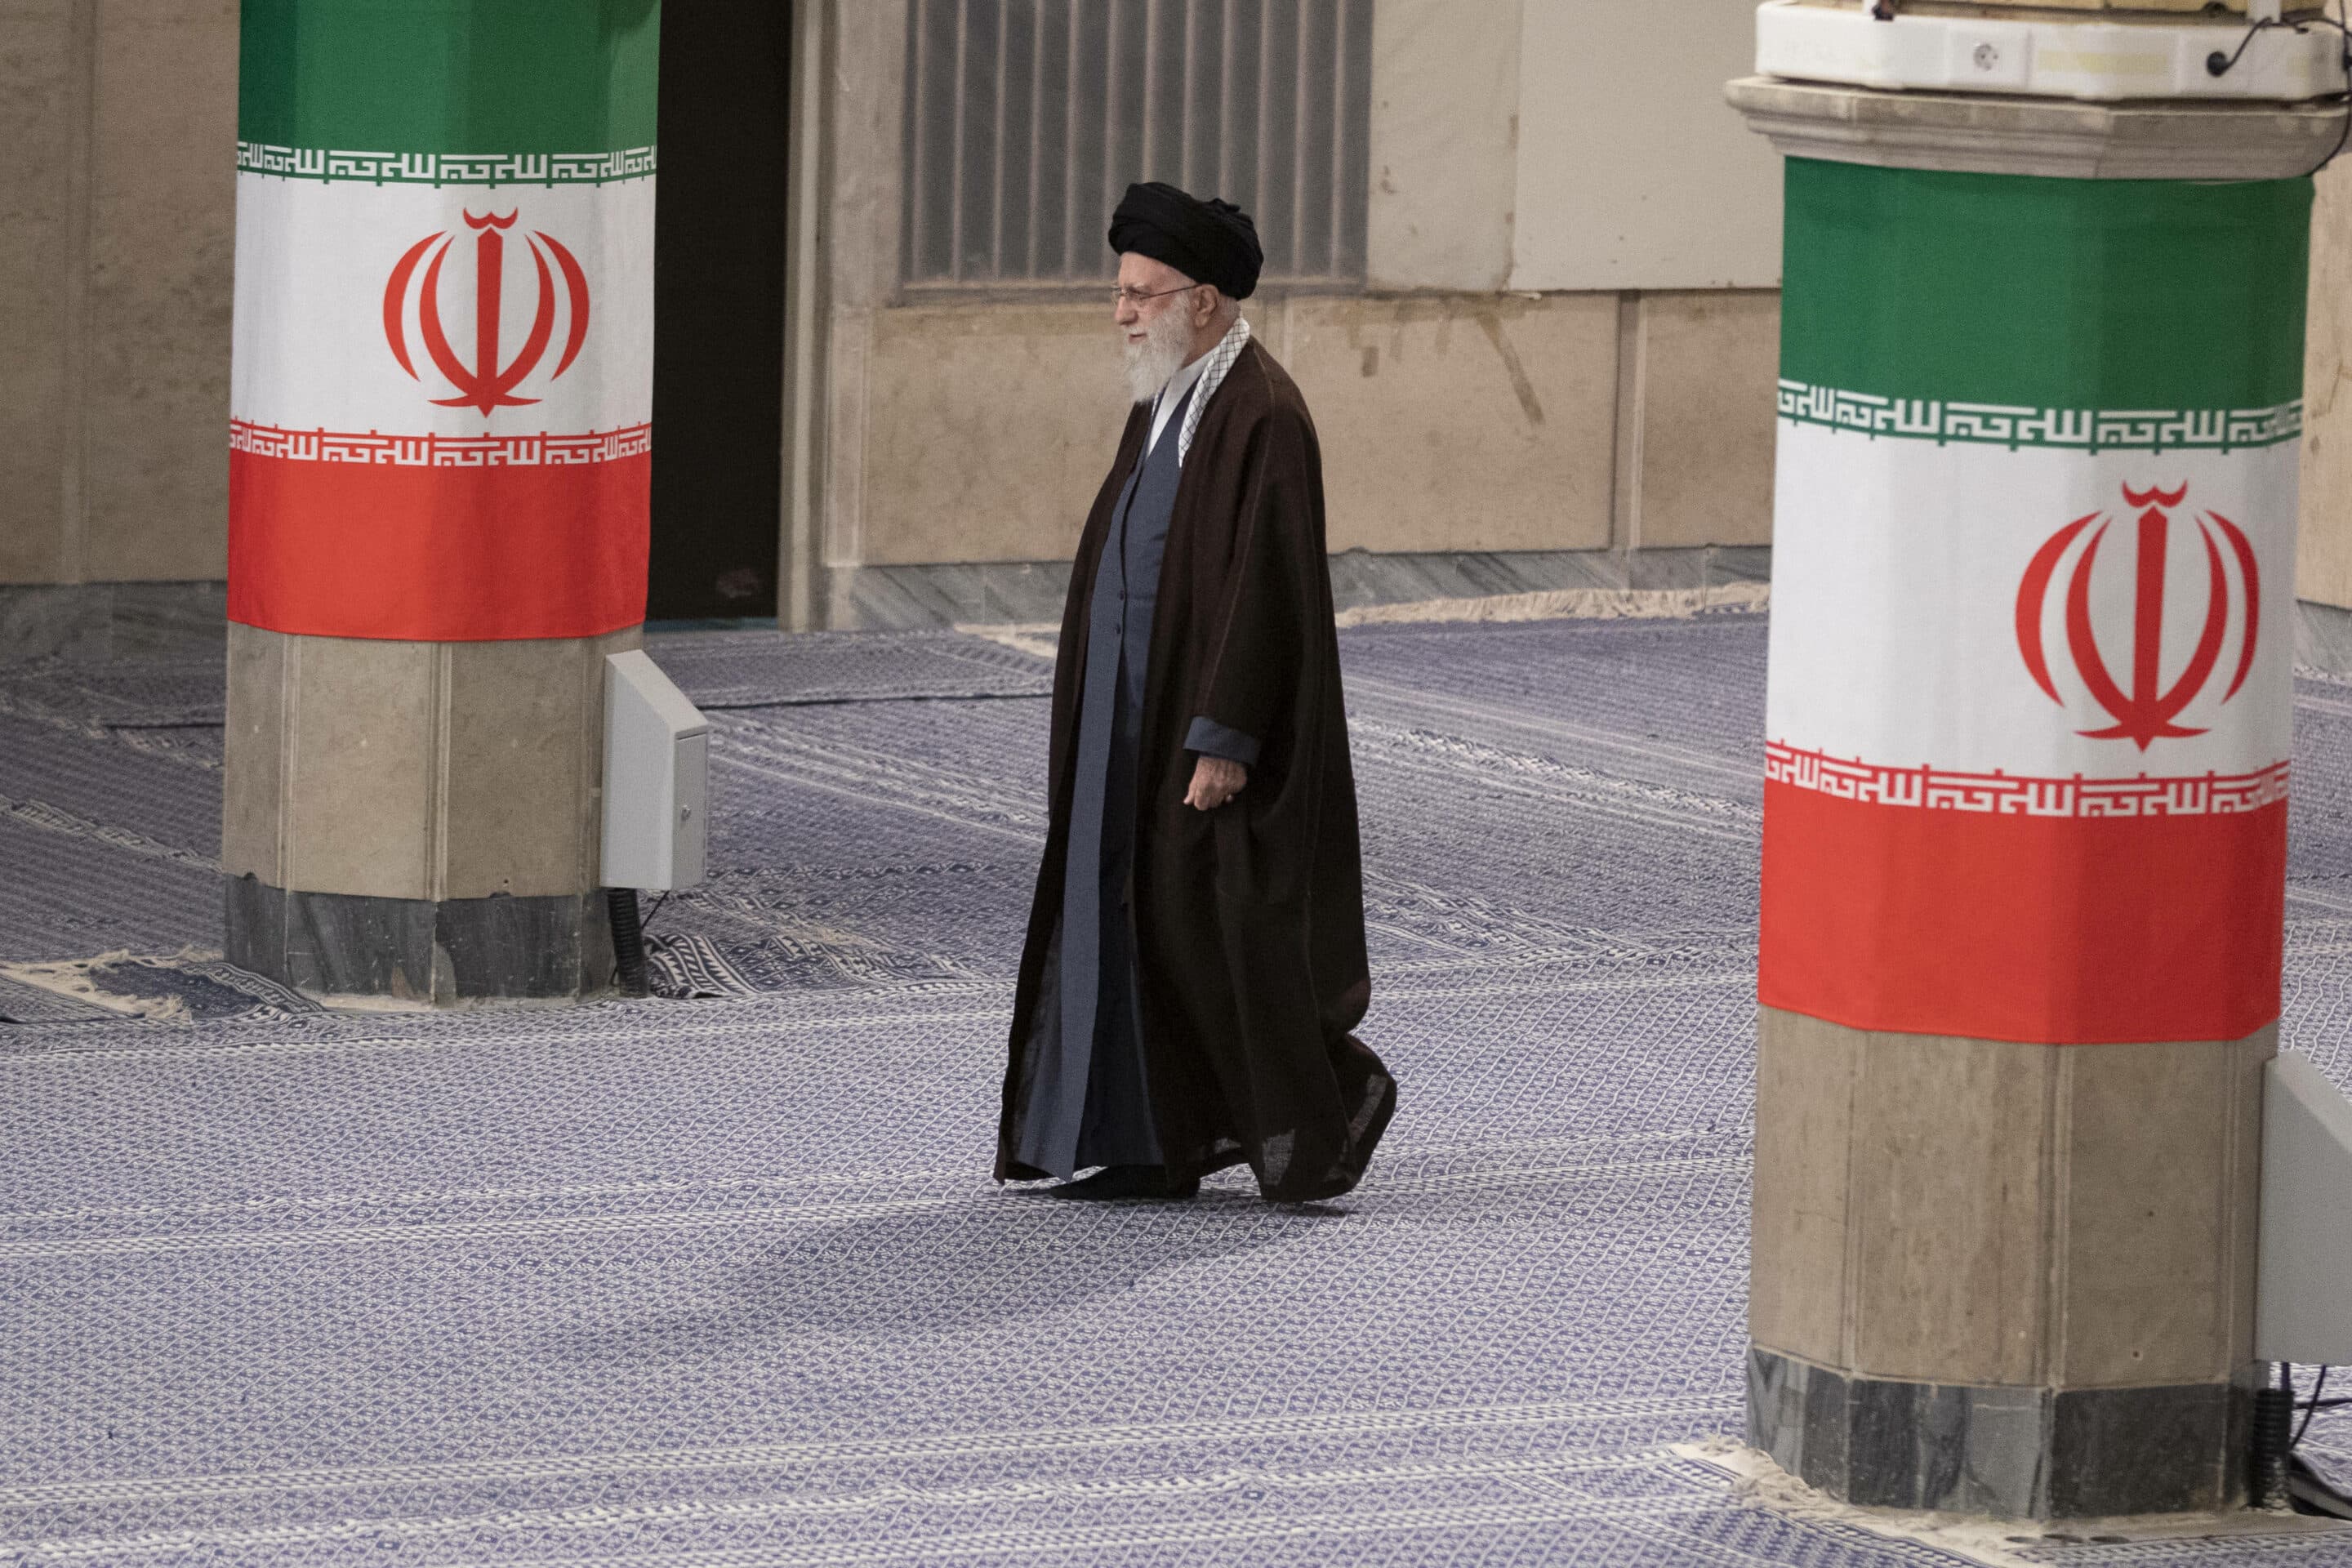 Iran's supreme leader Ayatollah Ali Khamenei walks past Iranian flags before casting his votes in the parliamentary elections and the elections for the Council of Experts on 01 March 2024, Iran, Tehran. (Photo by Sobhan Farajvan / Pacific Press) - SobhanFarajvan_030124//PACIFICPRESS_xyz00005033_000022/Credit:Sobhan Farajvan/PACIFIC PRESS/SIPA/2403011235